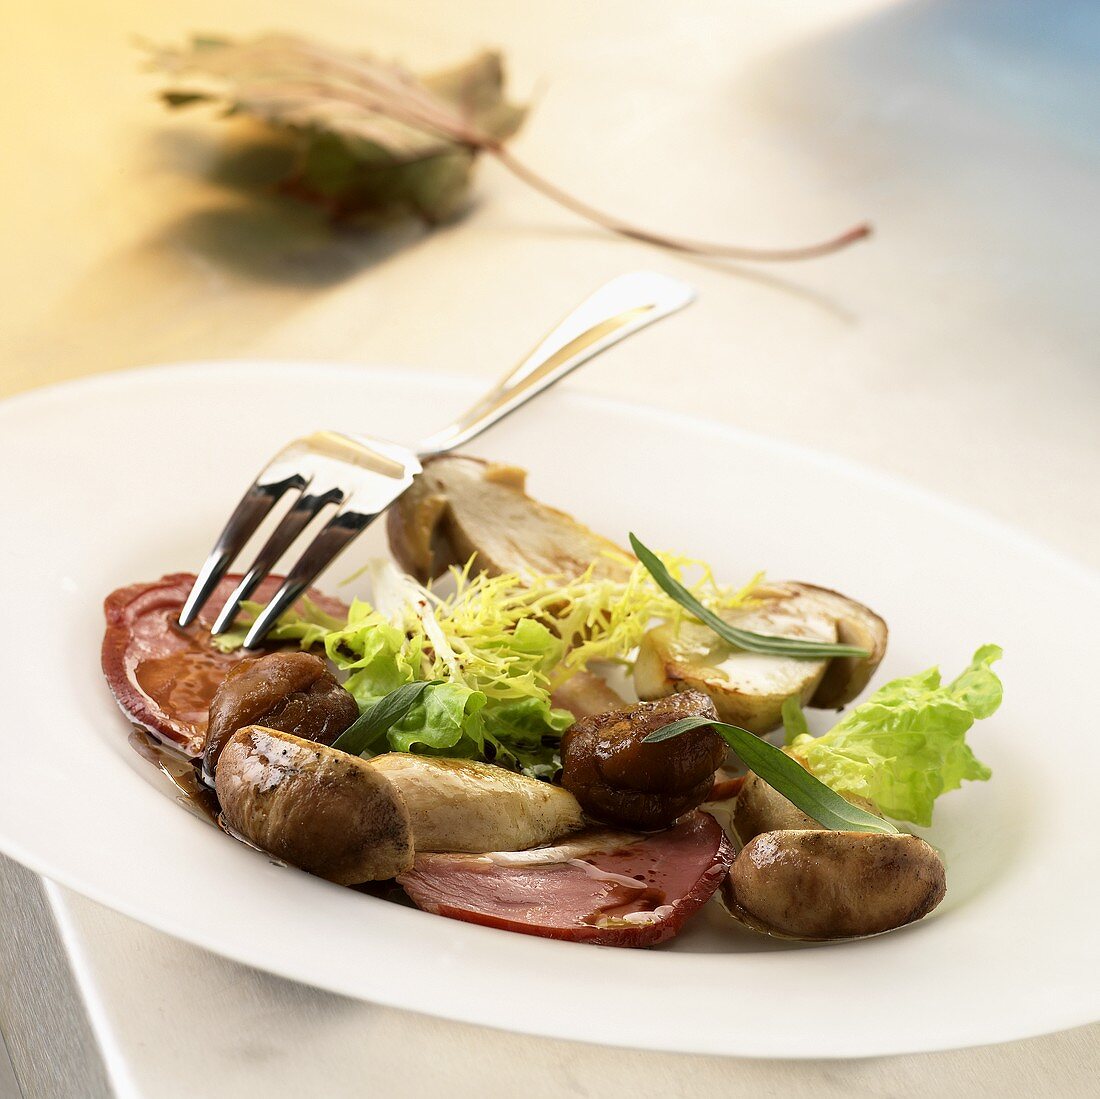 Cep salad with slices of duck breast